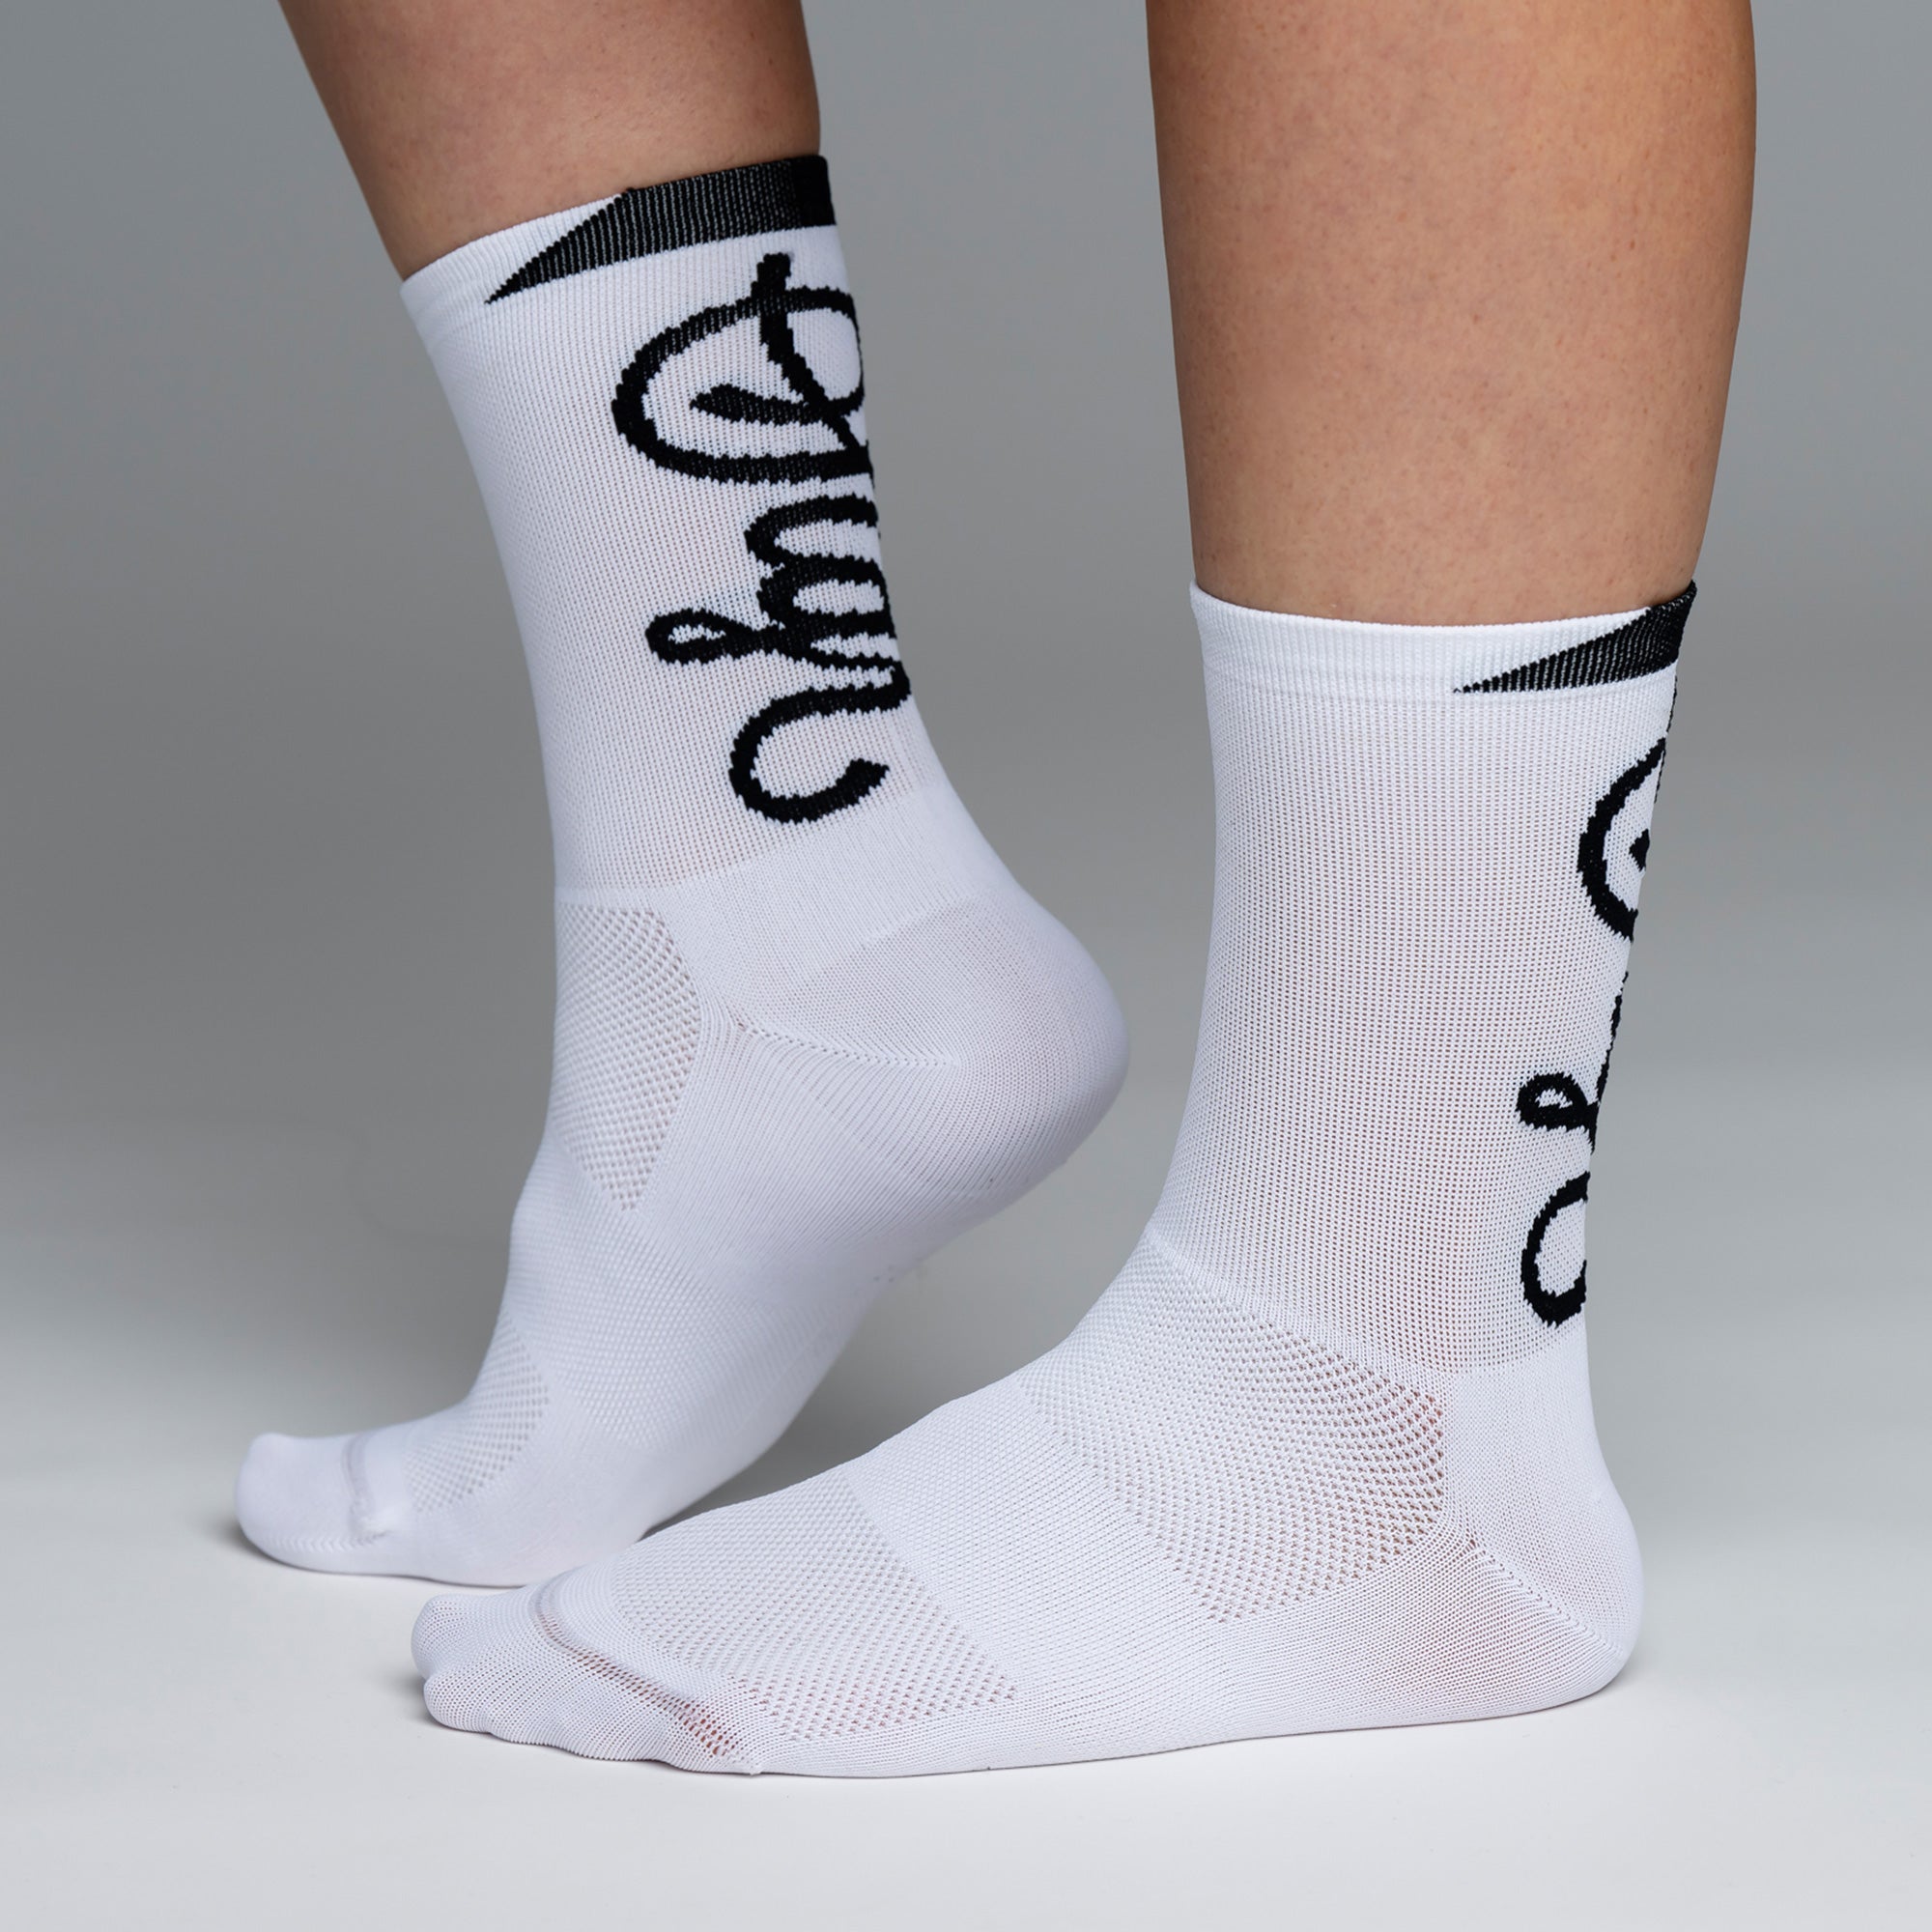 Snok - Larger Logo White Road Cycling Socks for Women - Pack of 2 pairs